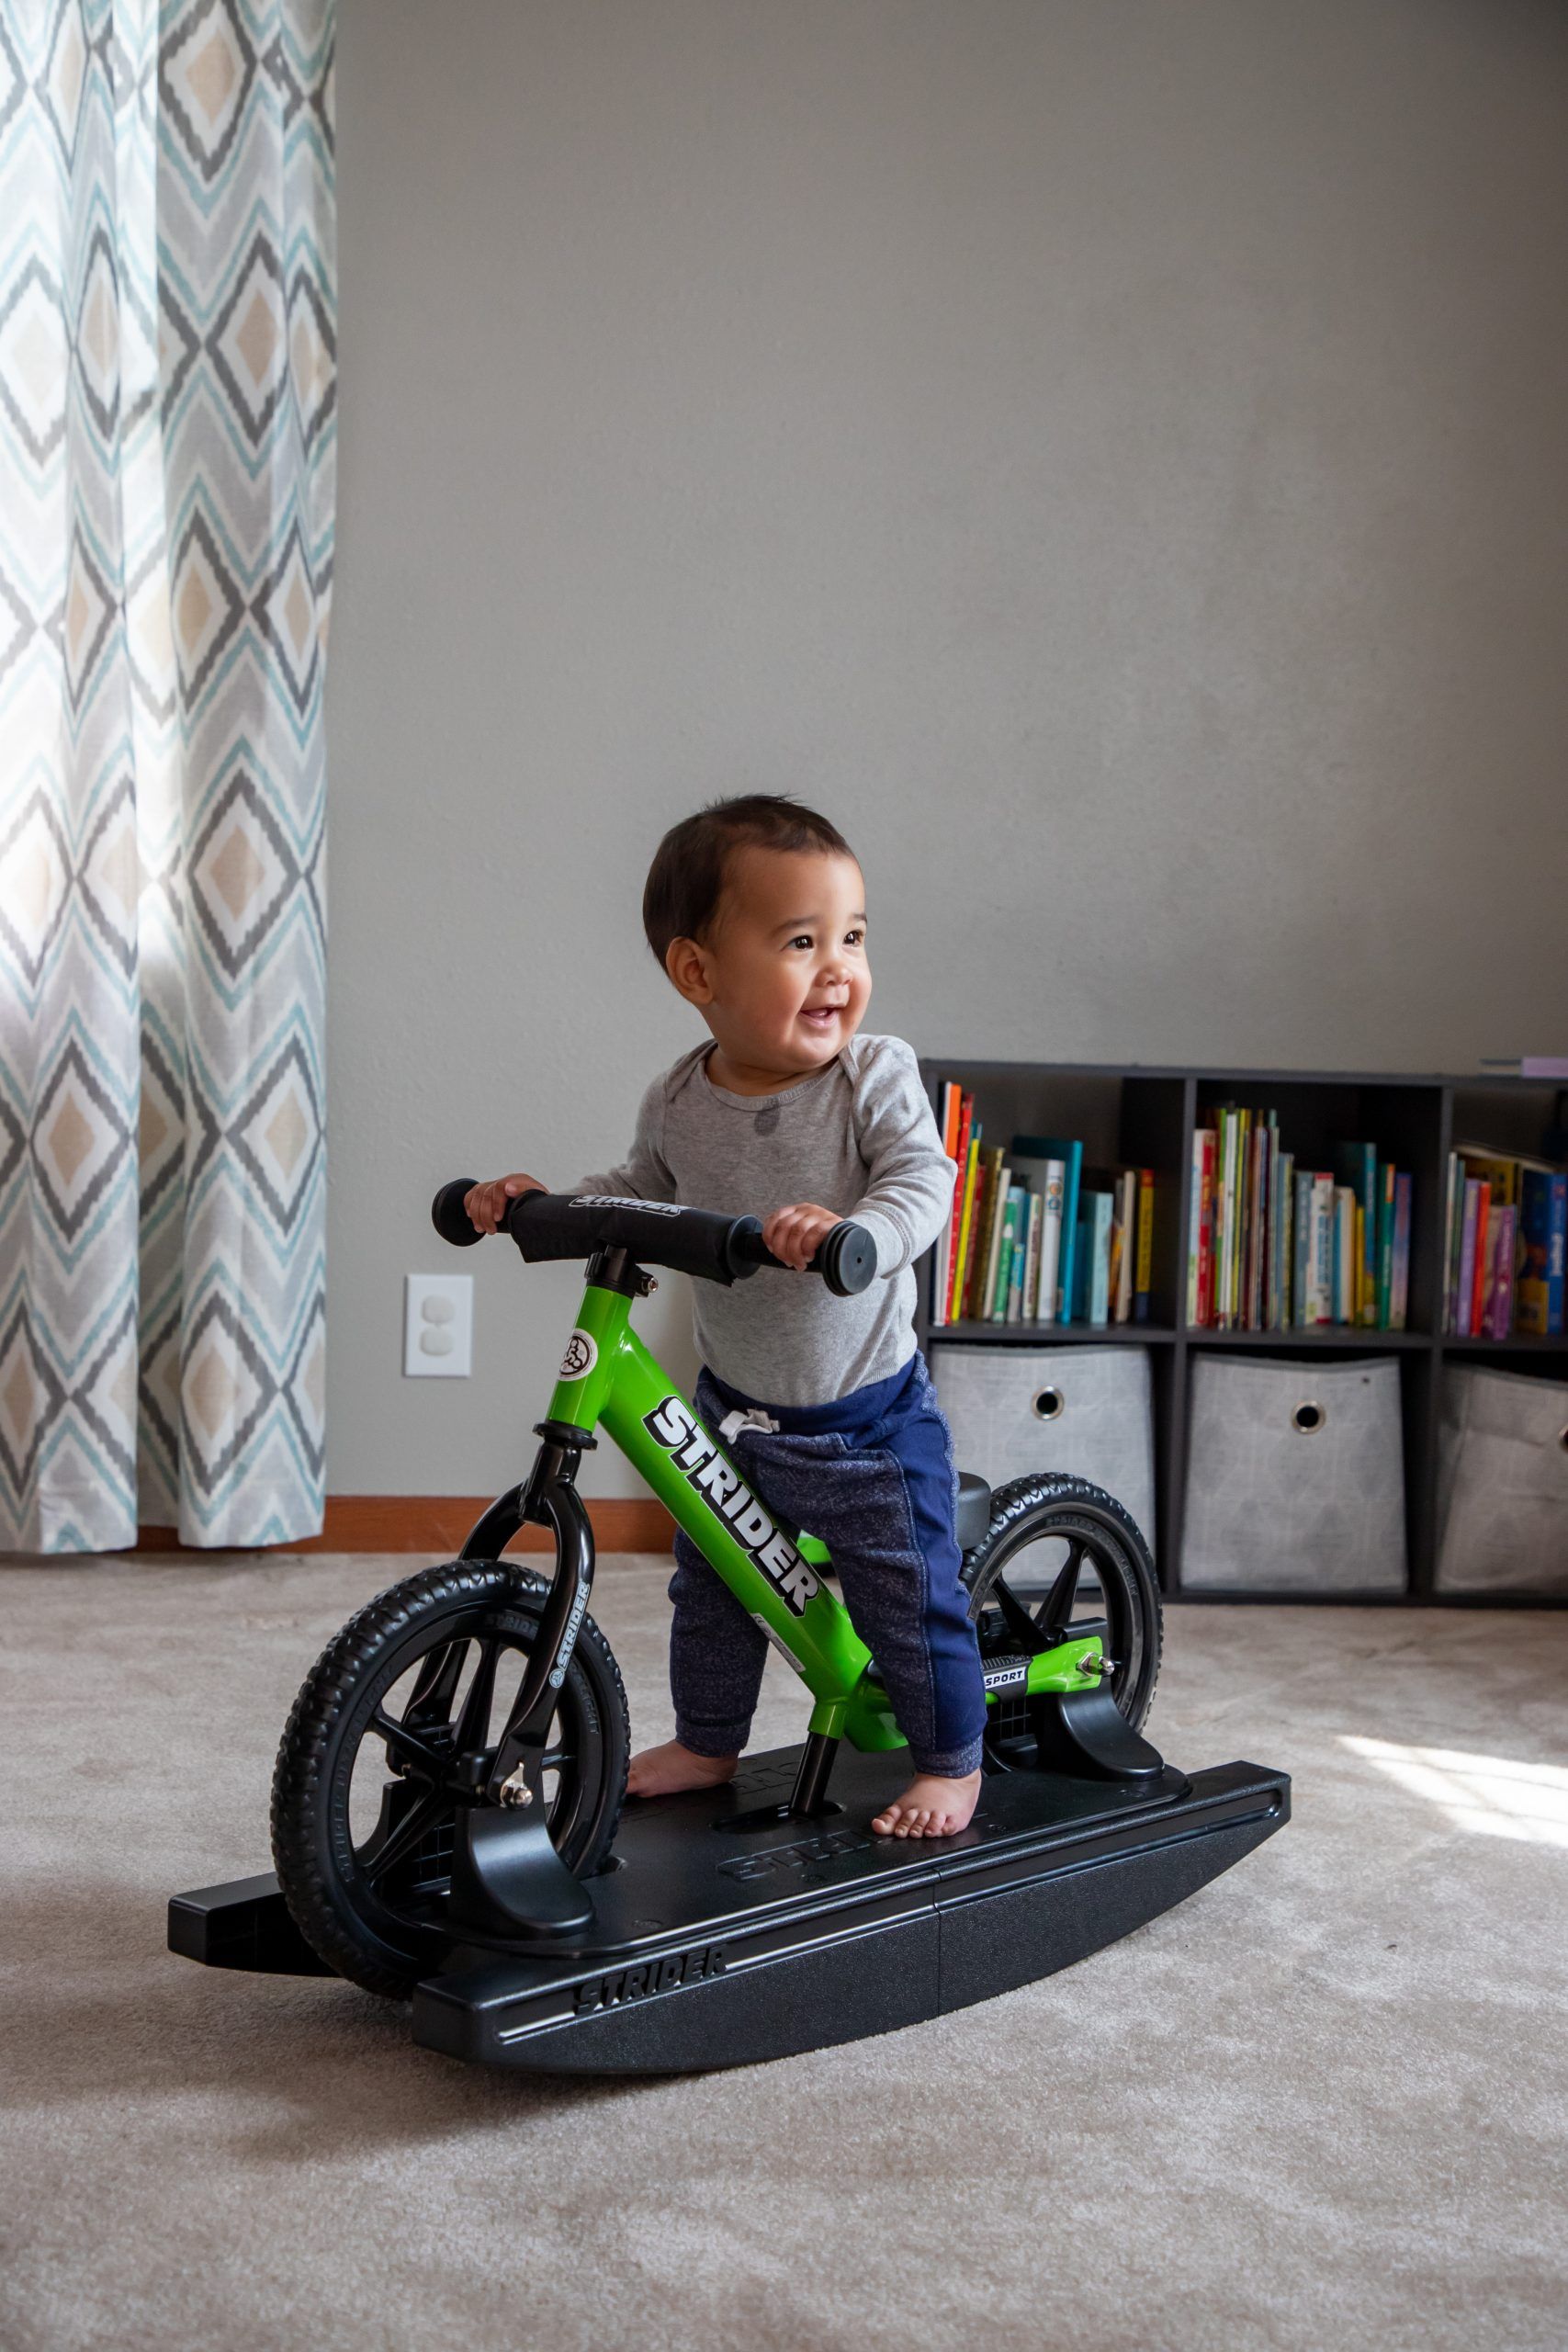 Boy plays on a green 12 Sport 2-in-1 Rocking Bike in a living room